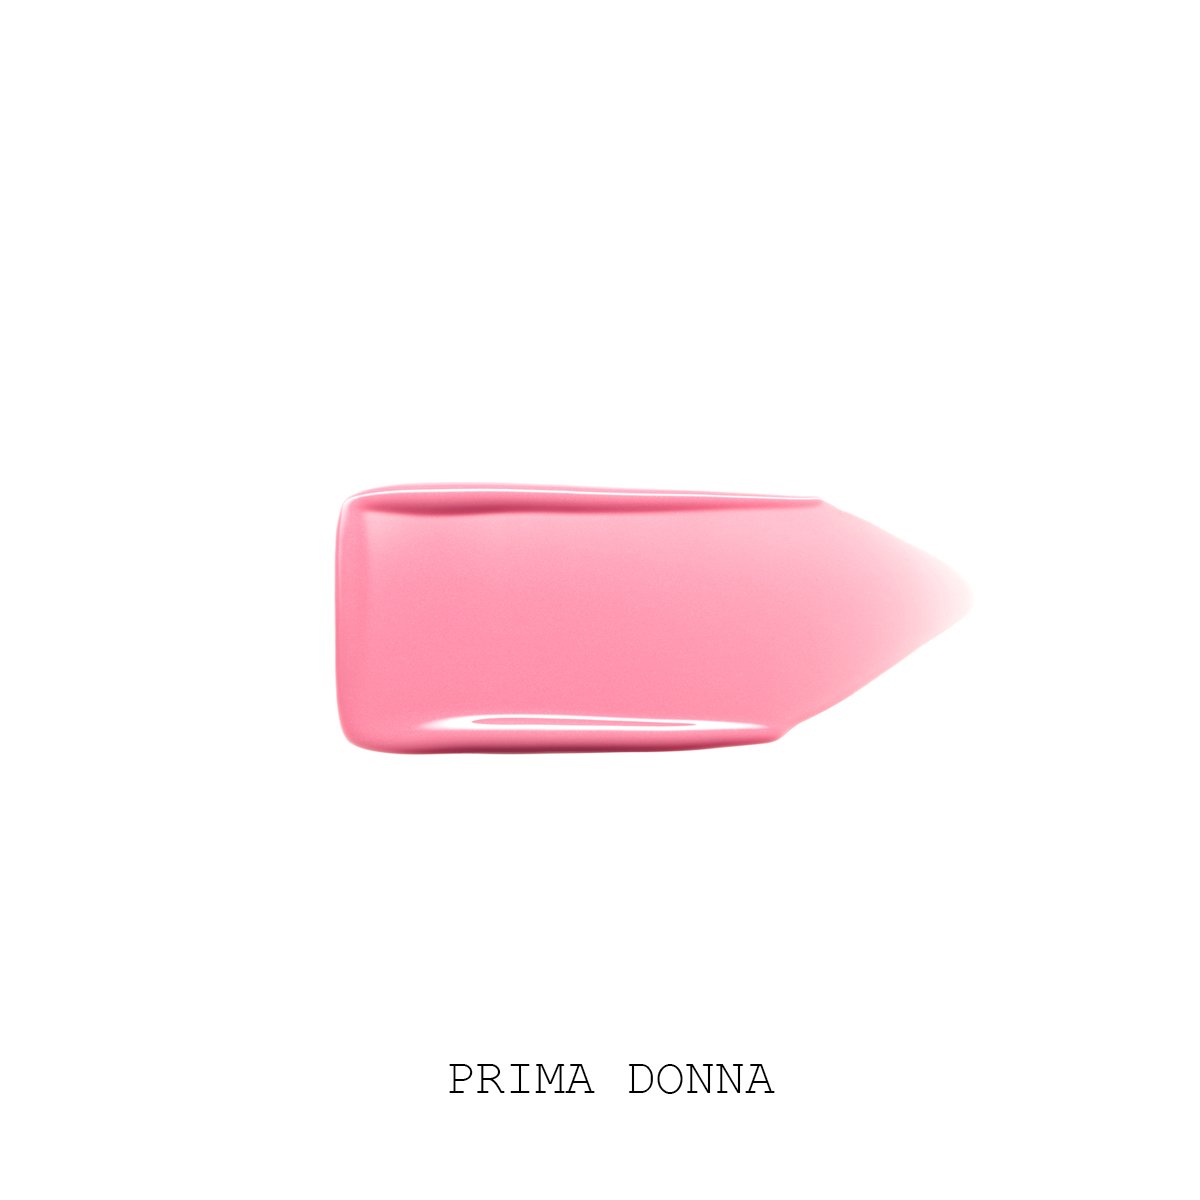 Load image into Gallery viewer, Pat McGrath Lust: Gloss Lip Gloss - Prima Donna (Mid Tone Cool Pink)
